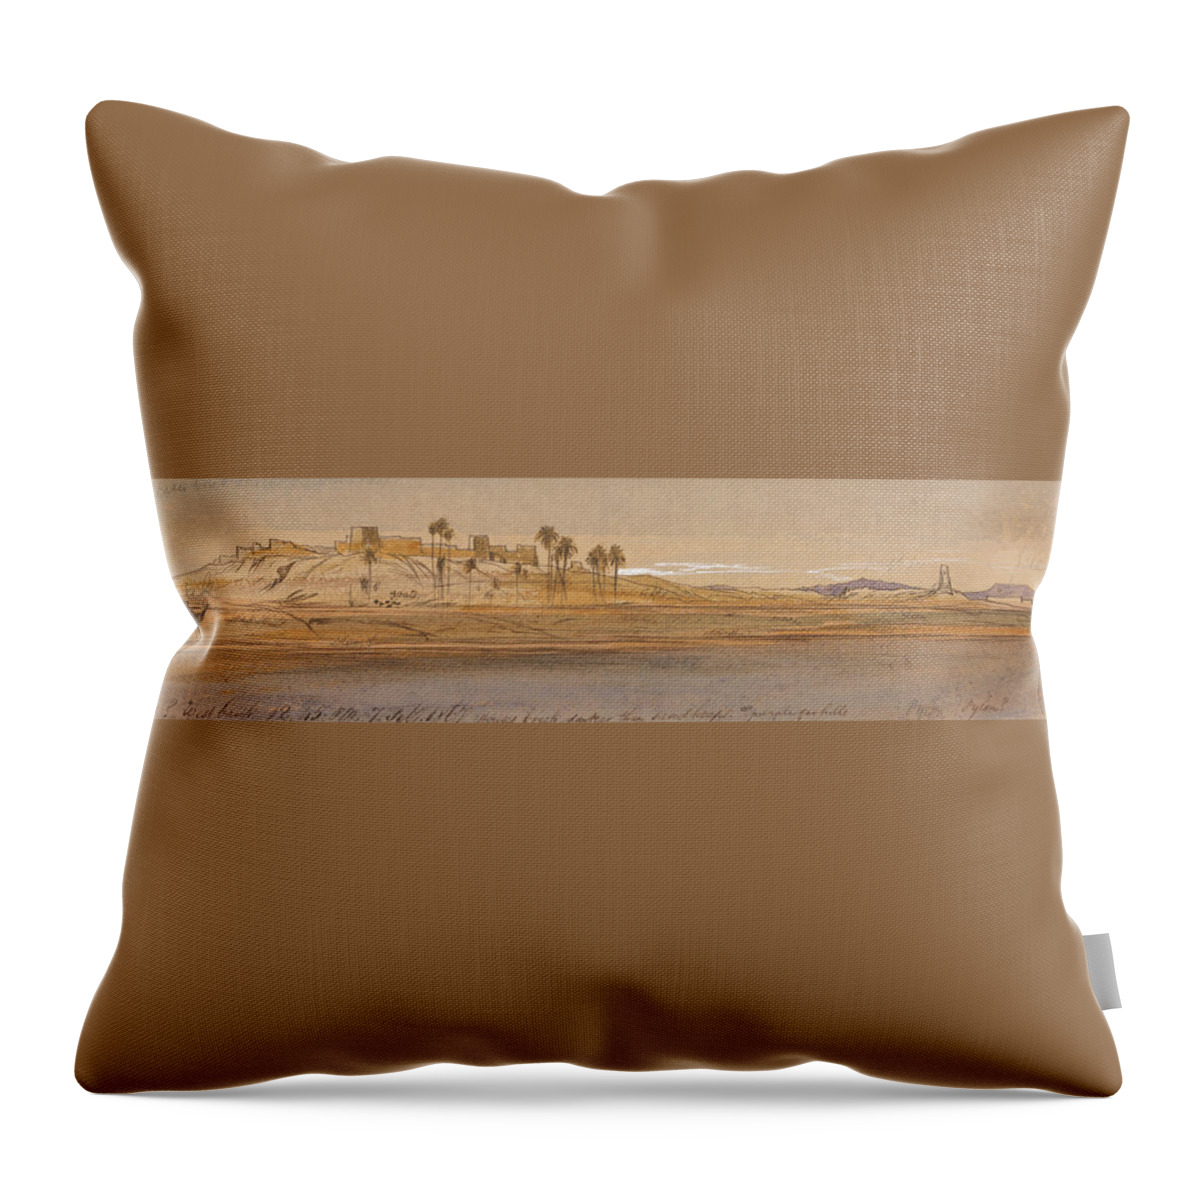 English Art Throw Pillow featuring the drawing Faras Westbank by Edward Lear